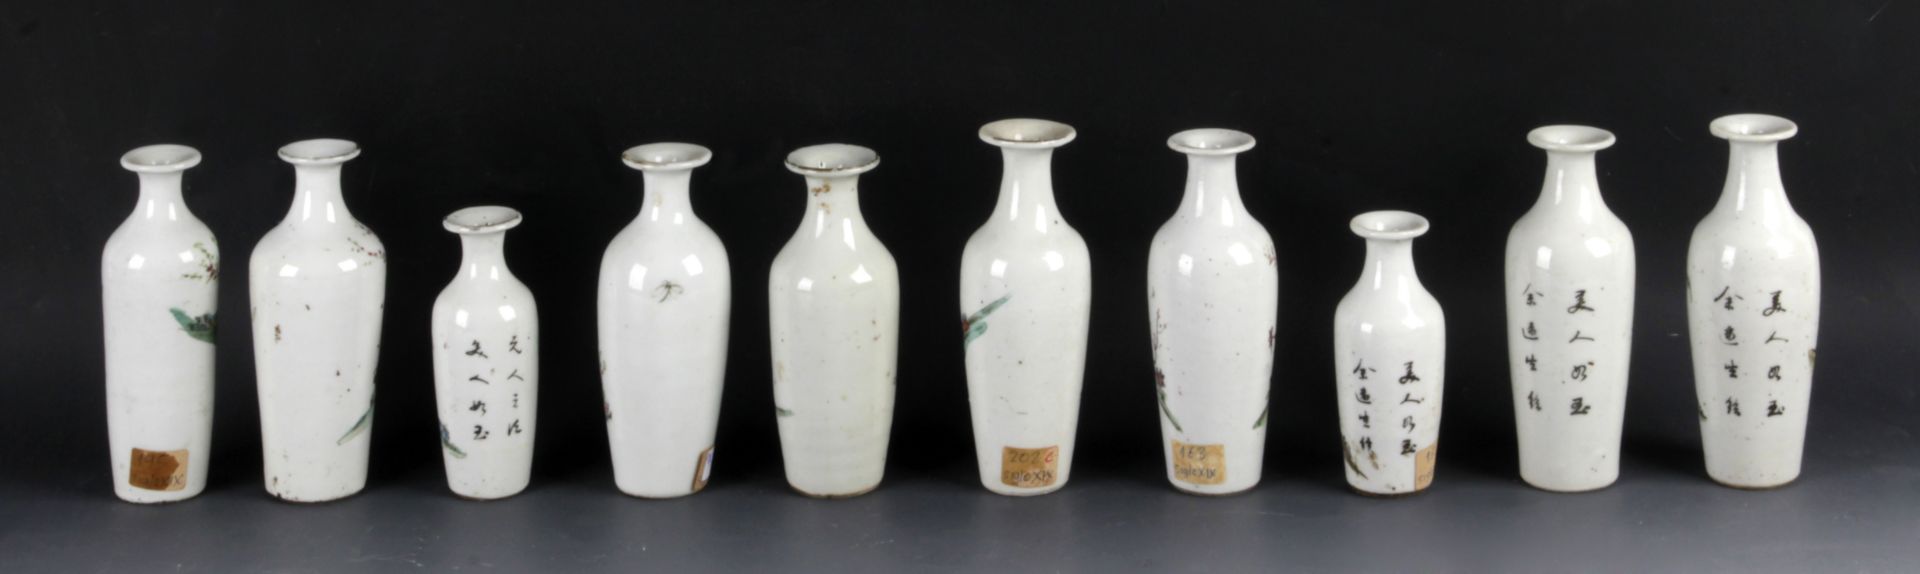 A collection of 10 Chinese porcelain vases from the Republic period - Image 3 of 4